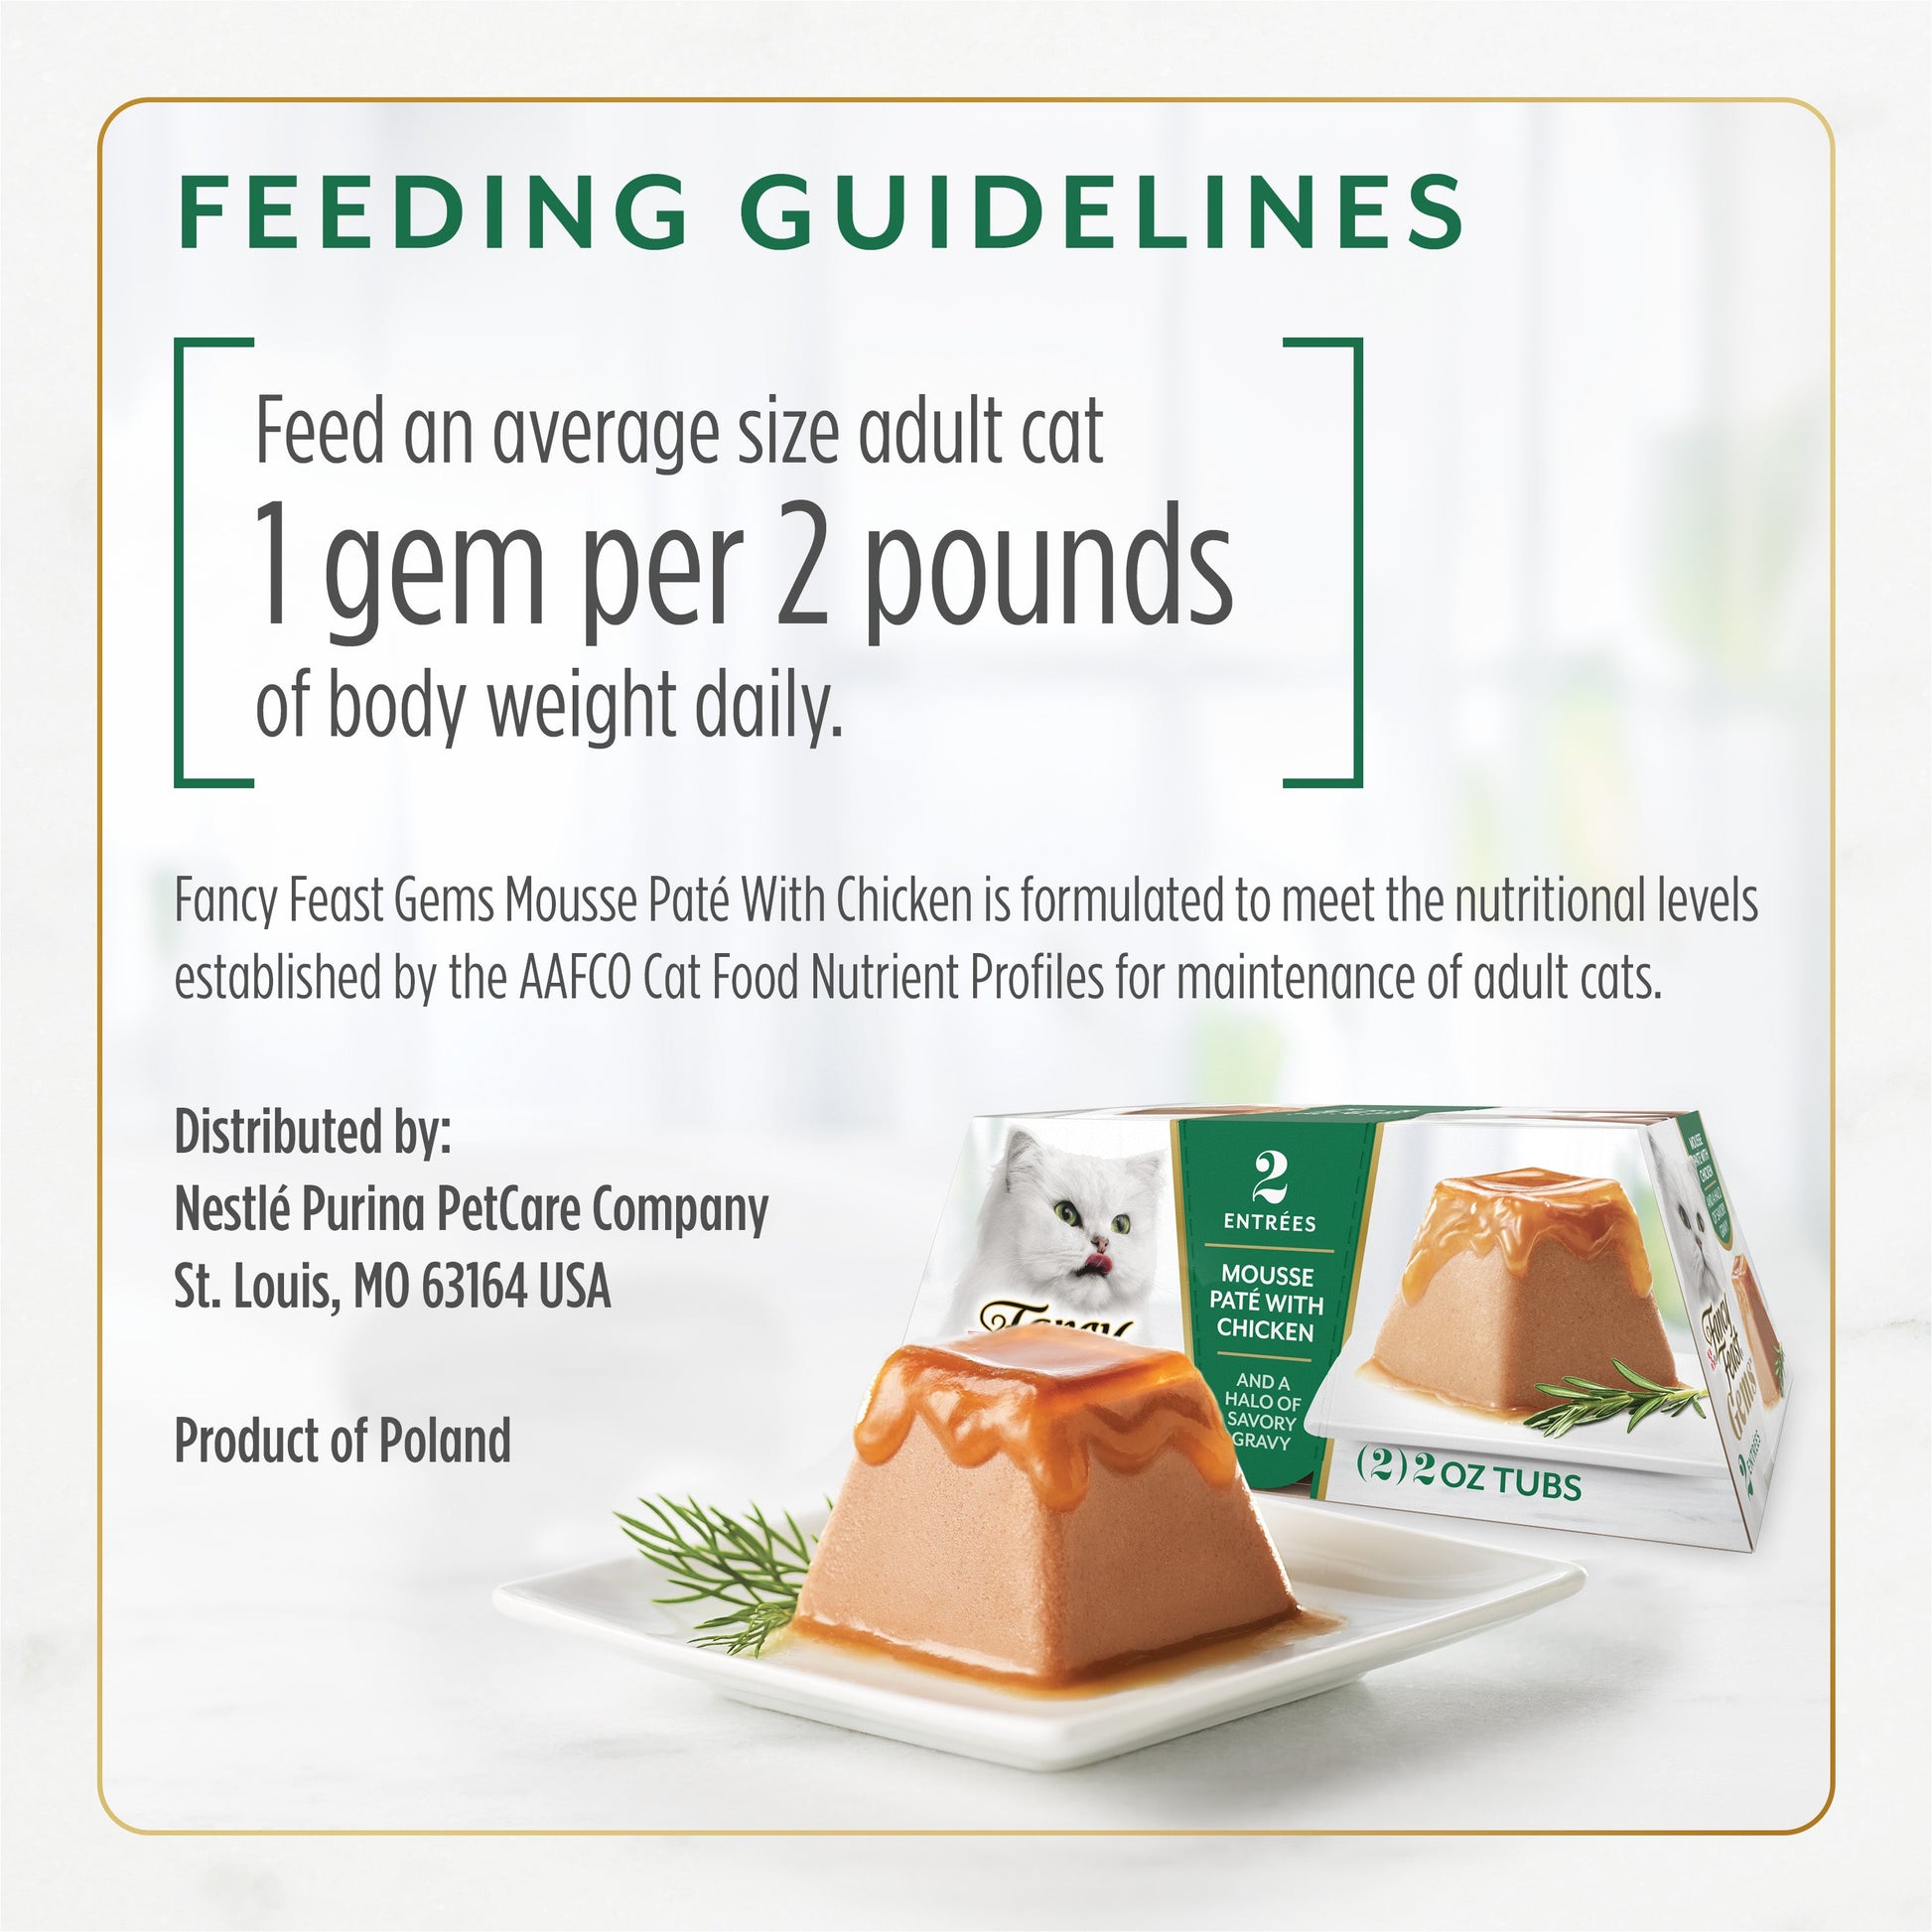 Fancy Feast Gems Mousse Pate with Chicken feeding guidelines